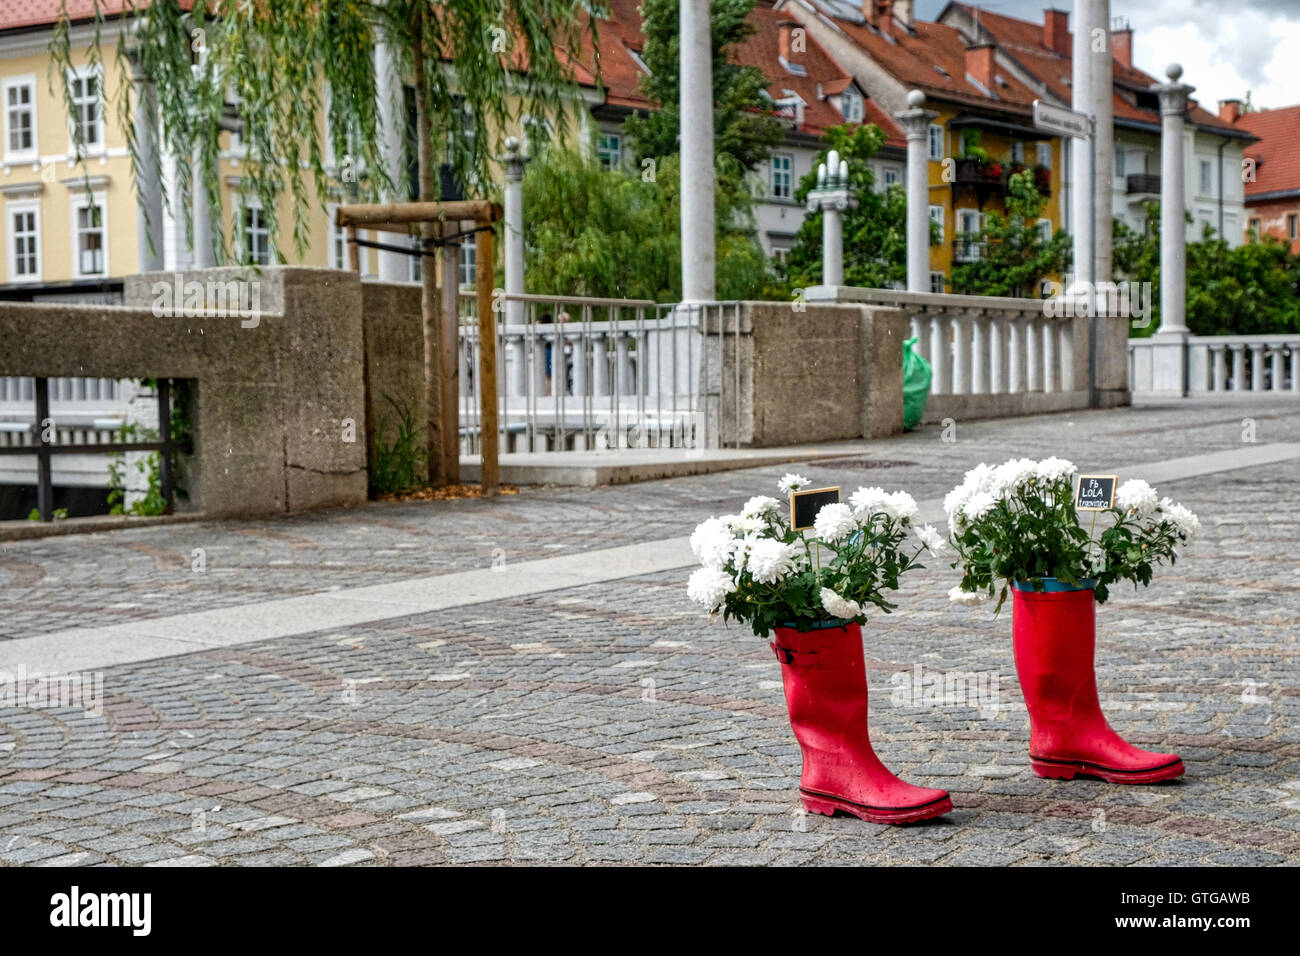 Red wellies filled with white flowers on the pavement Stock Photo